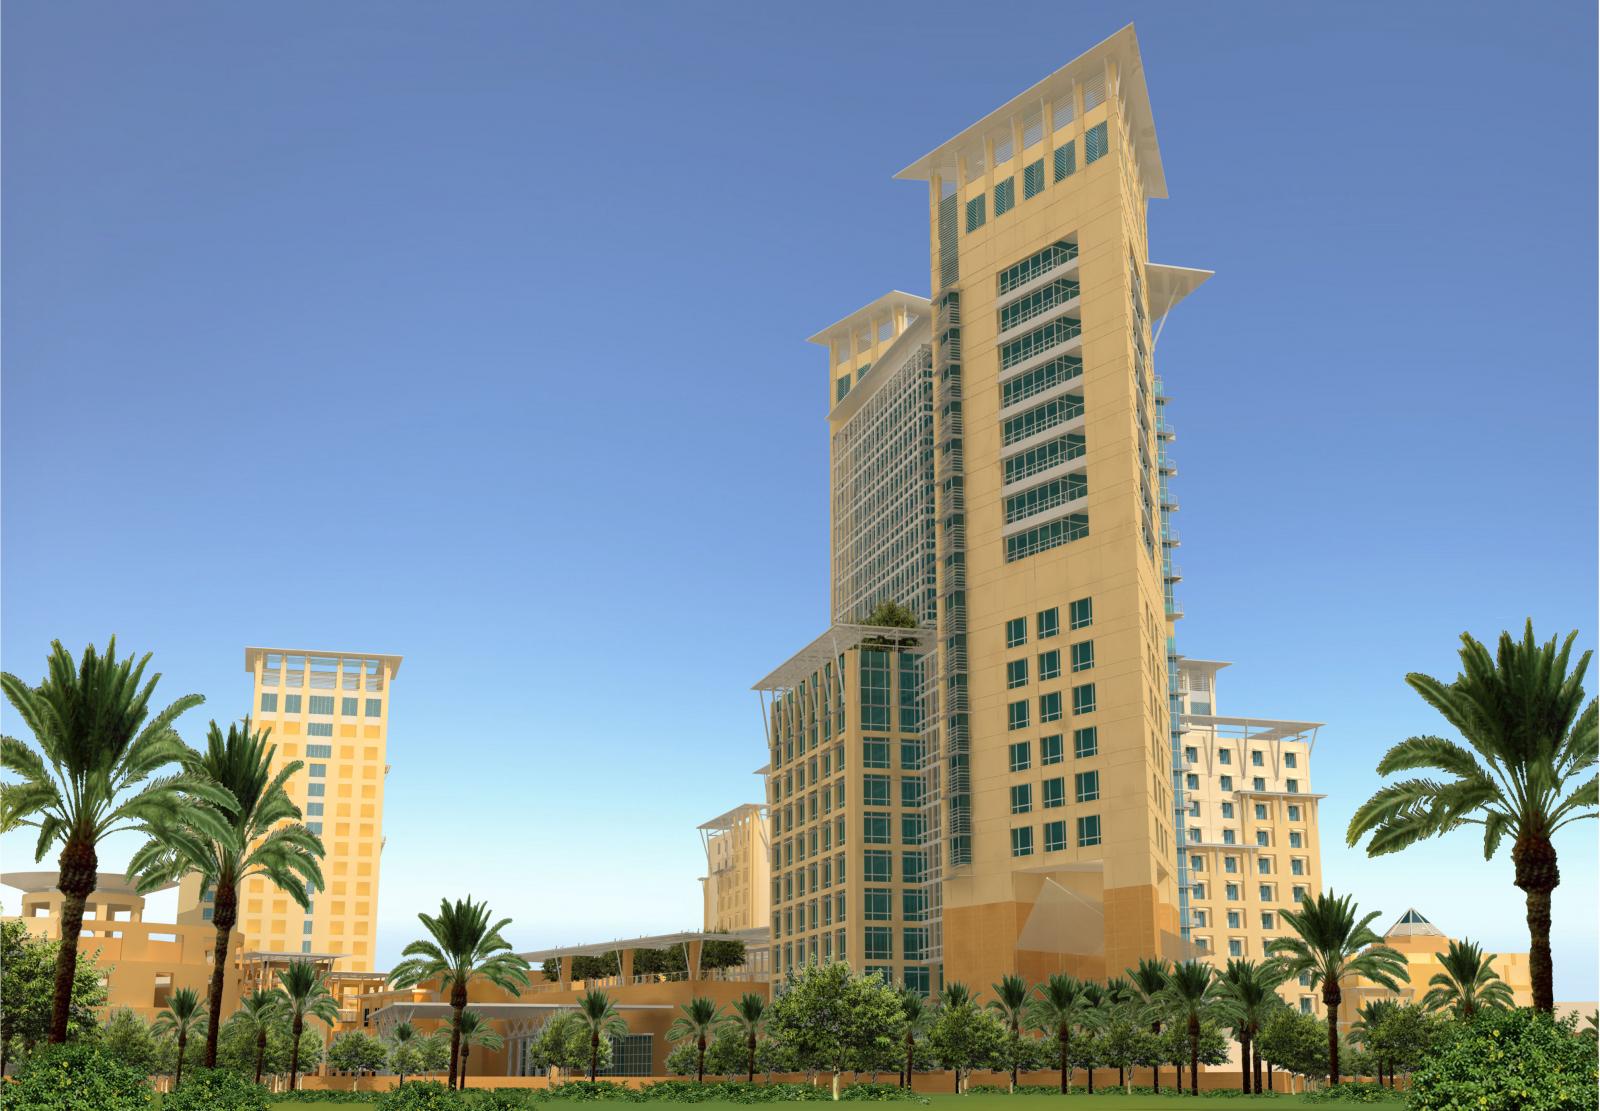 Al-Manshar Offices and Apartments Tower